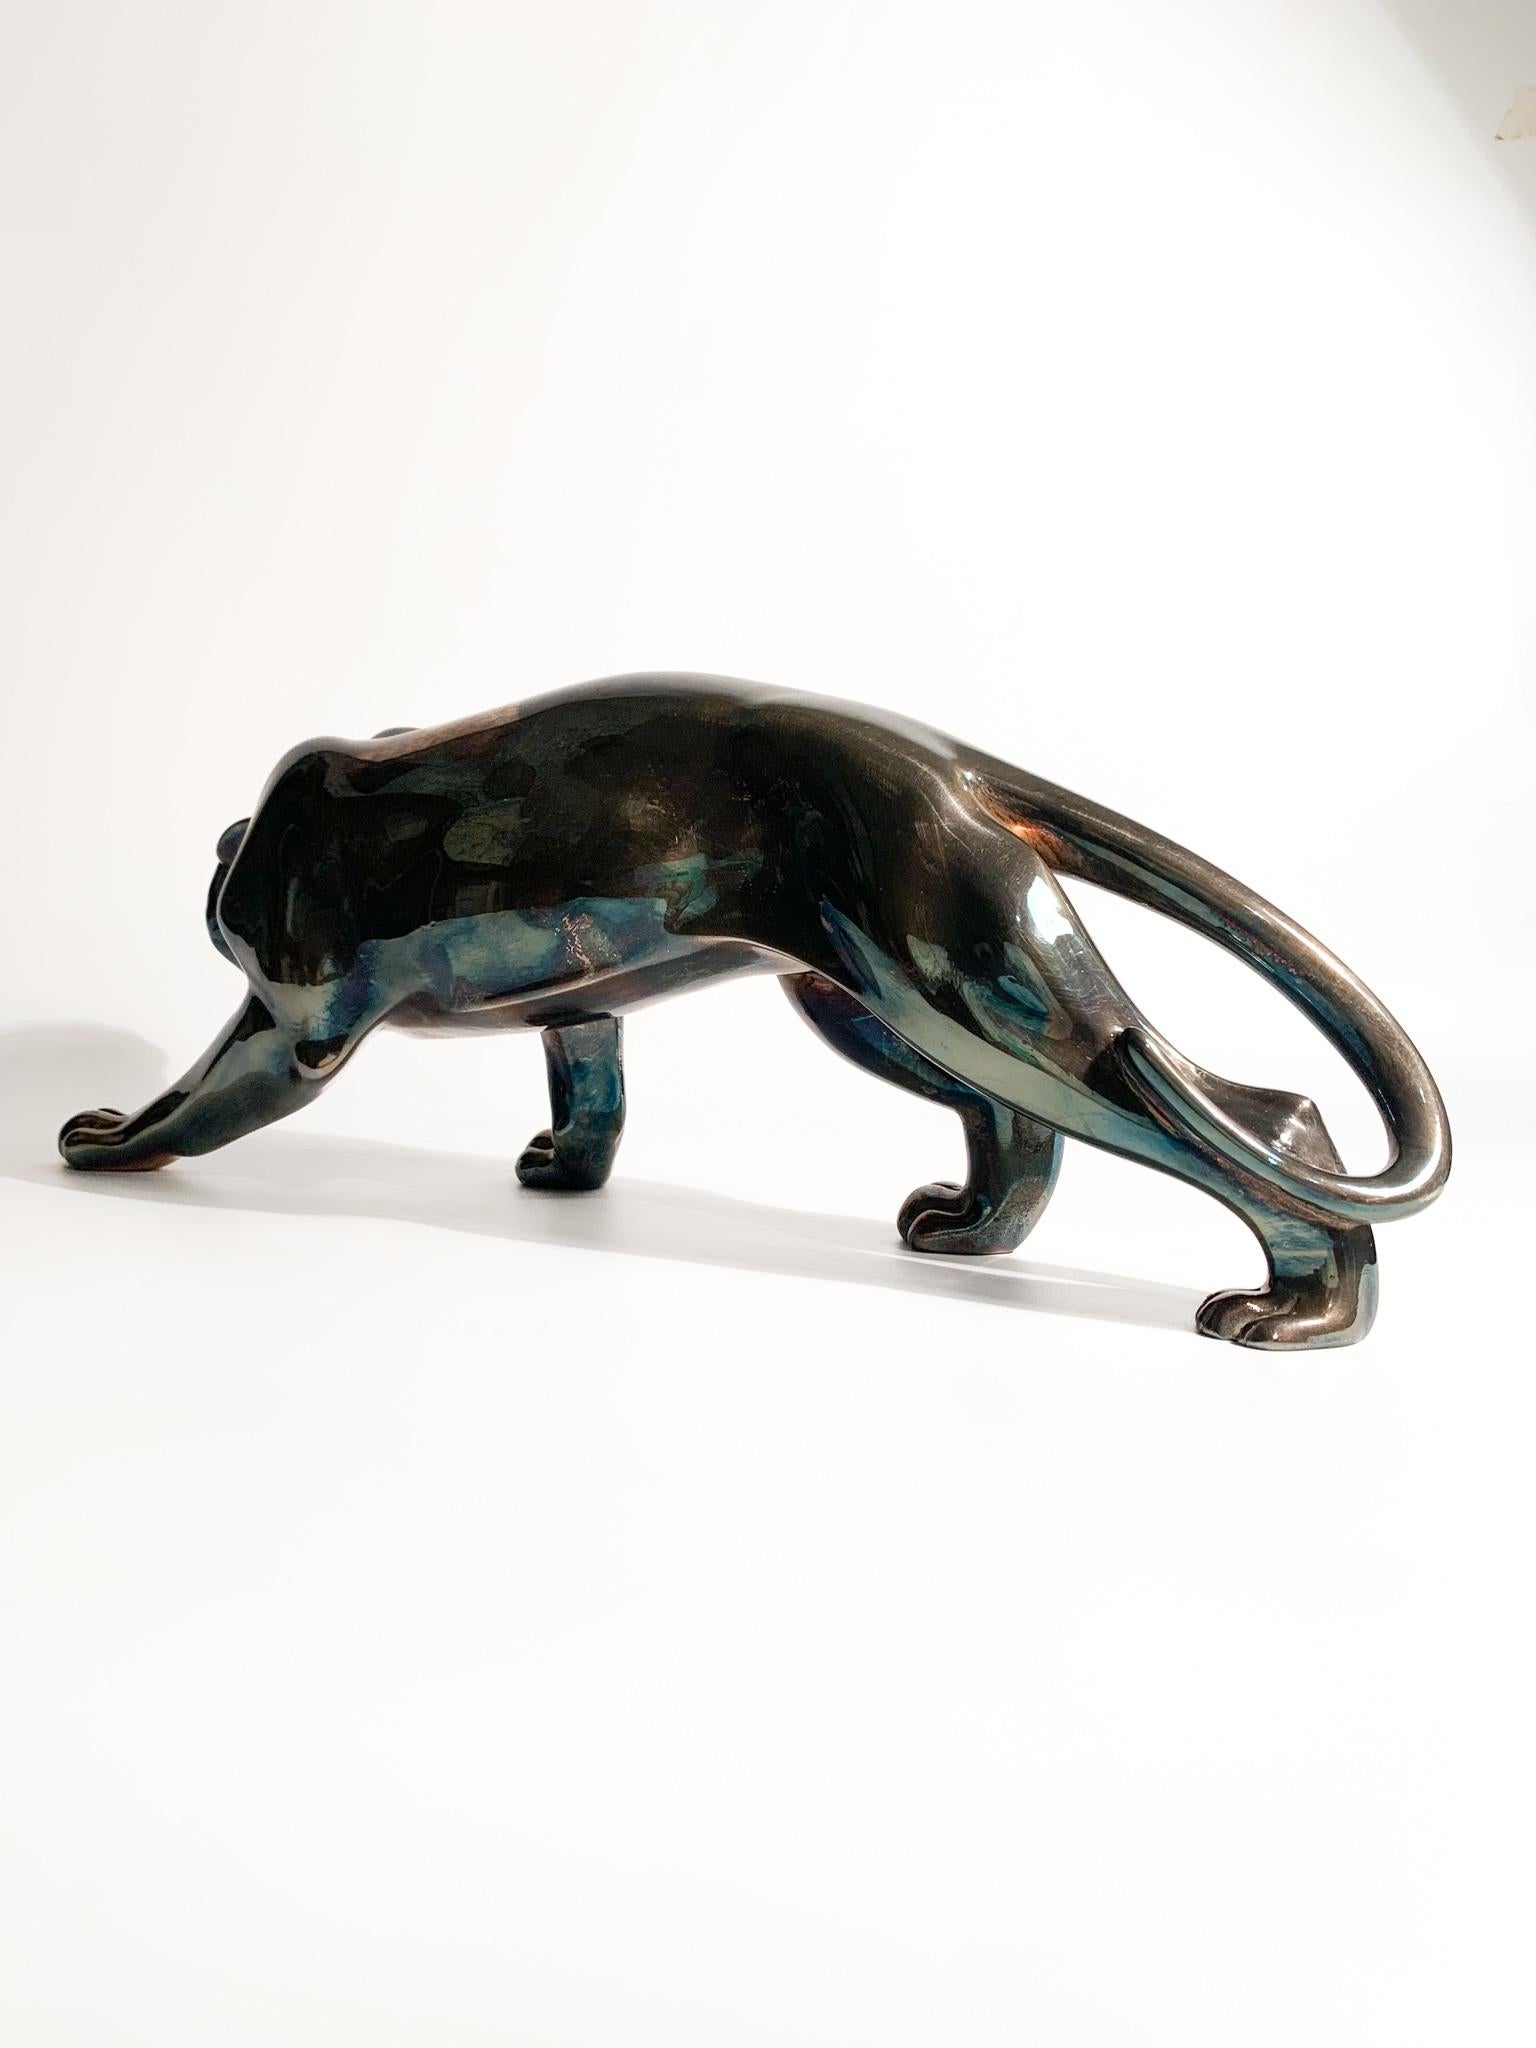 Metal French Deco Sculpture of Feline with Silver Casting from the 1930s For Sale